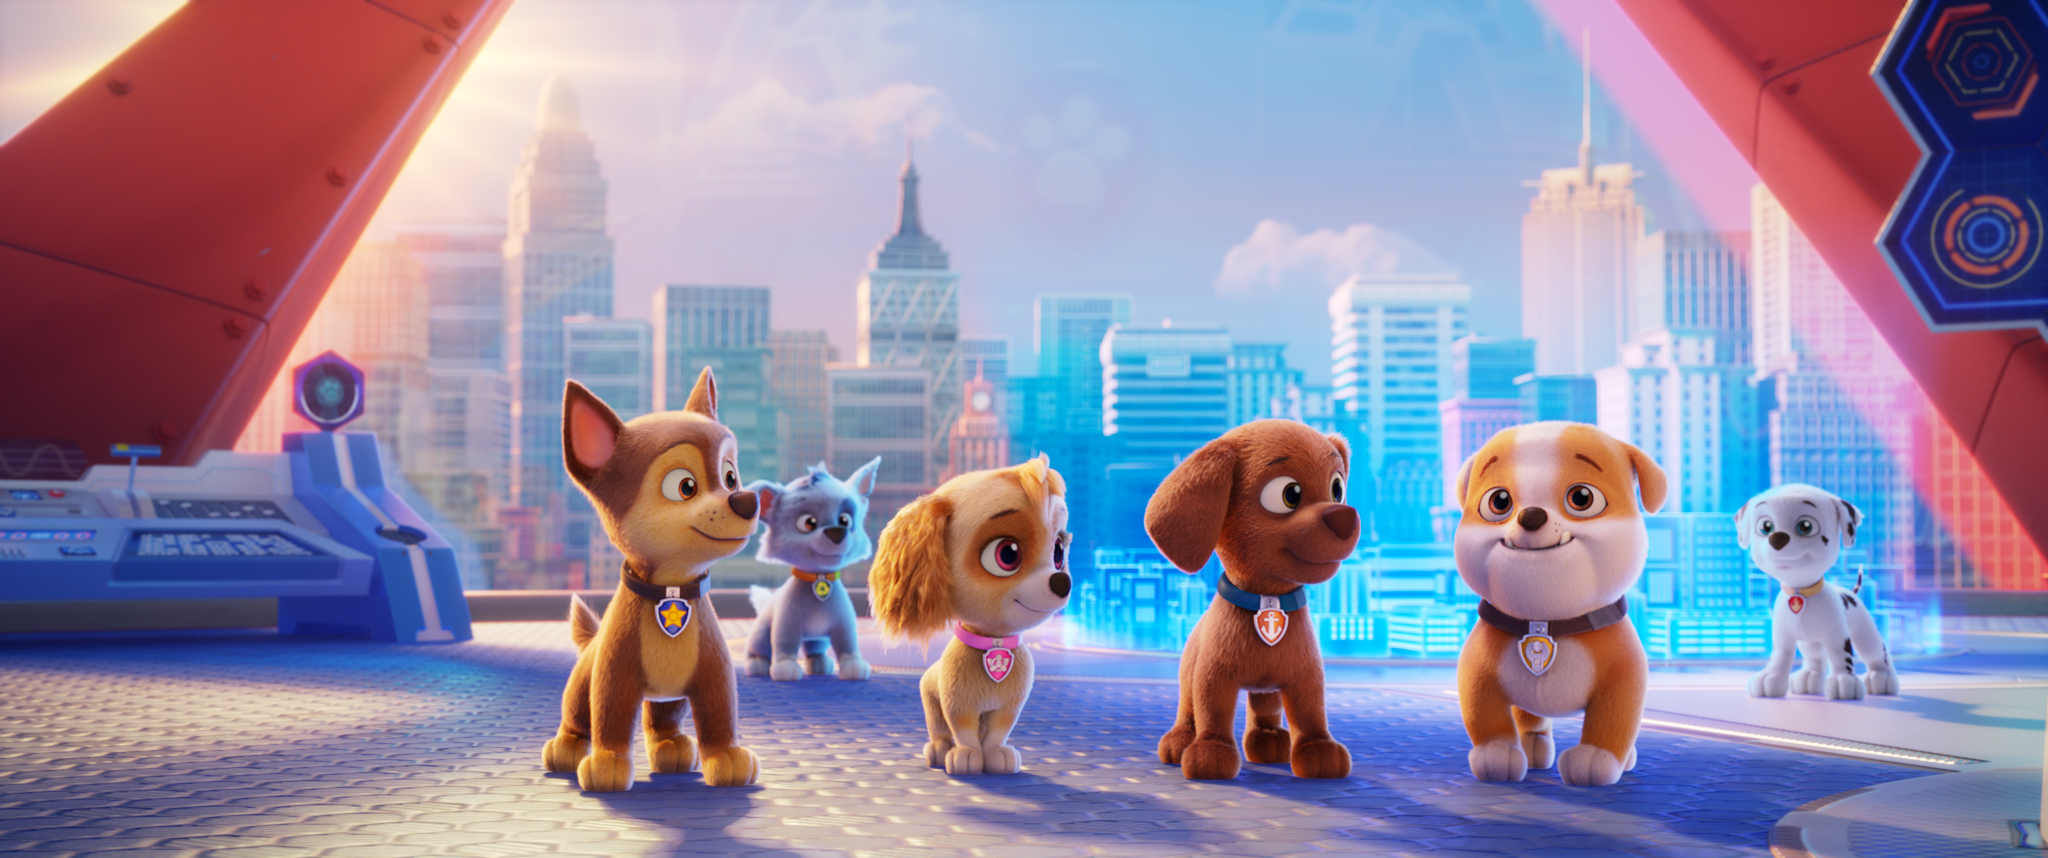 Paw Patrol: The Movie Cast Featurette And Character Posters!